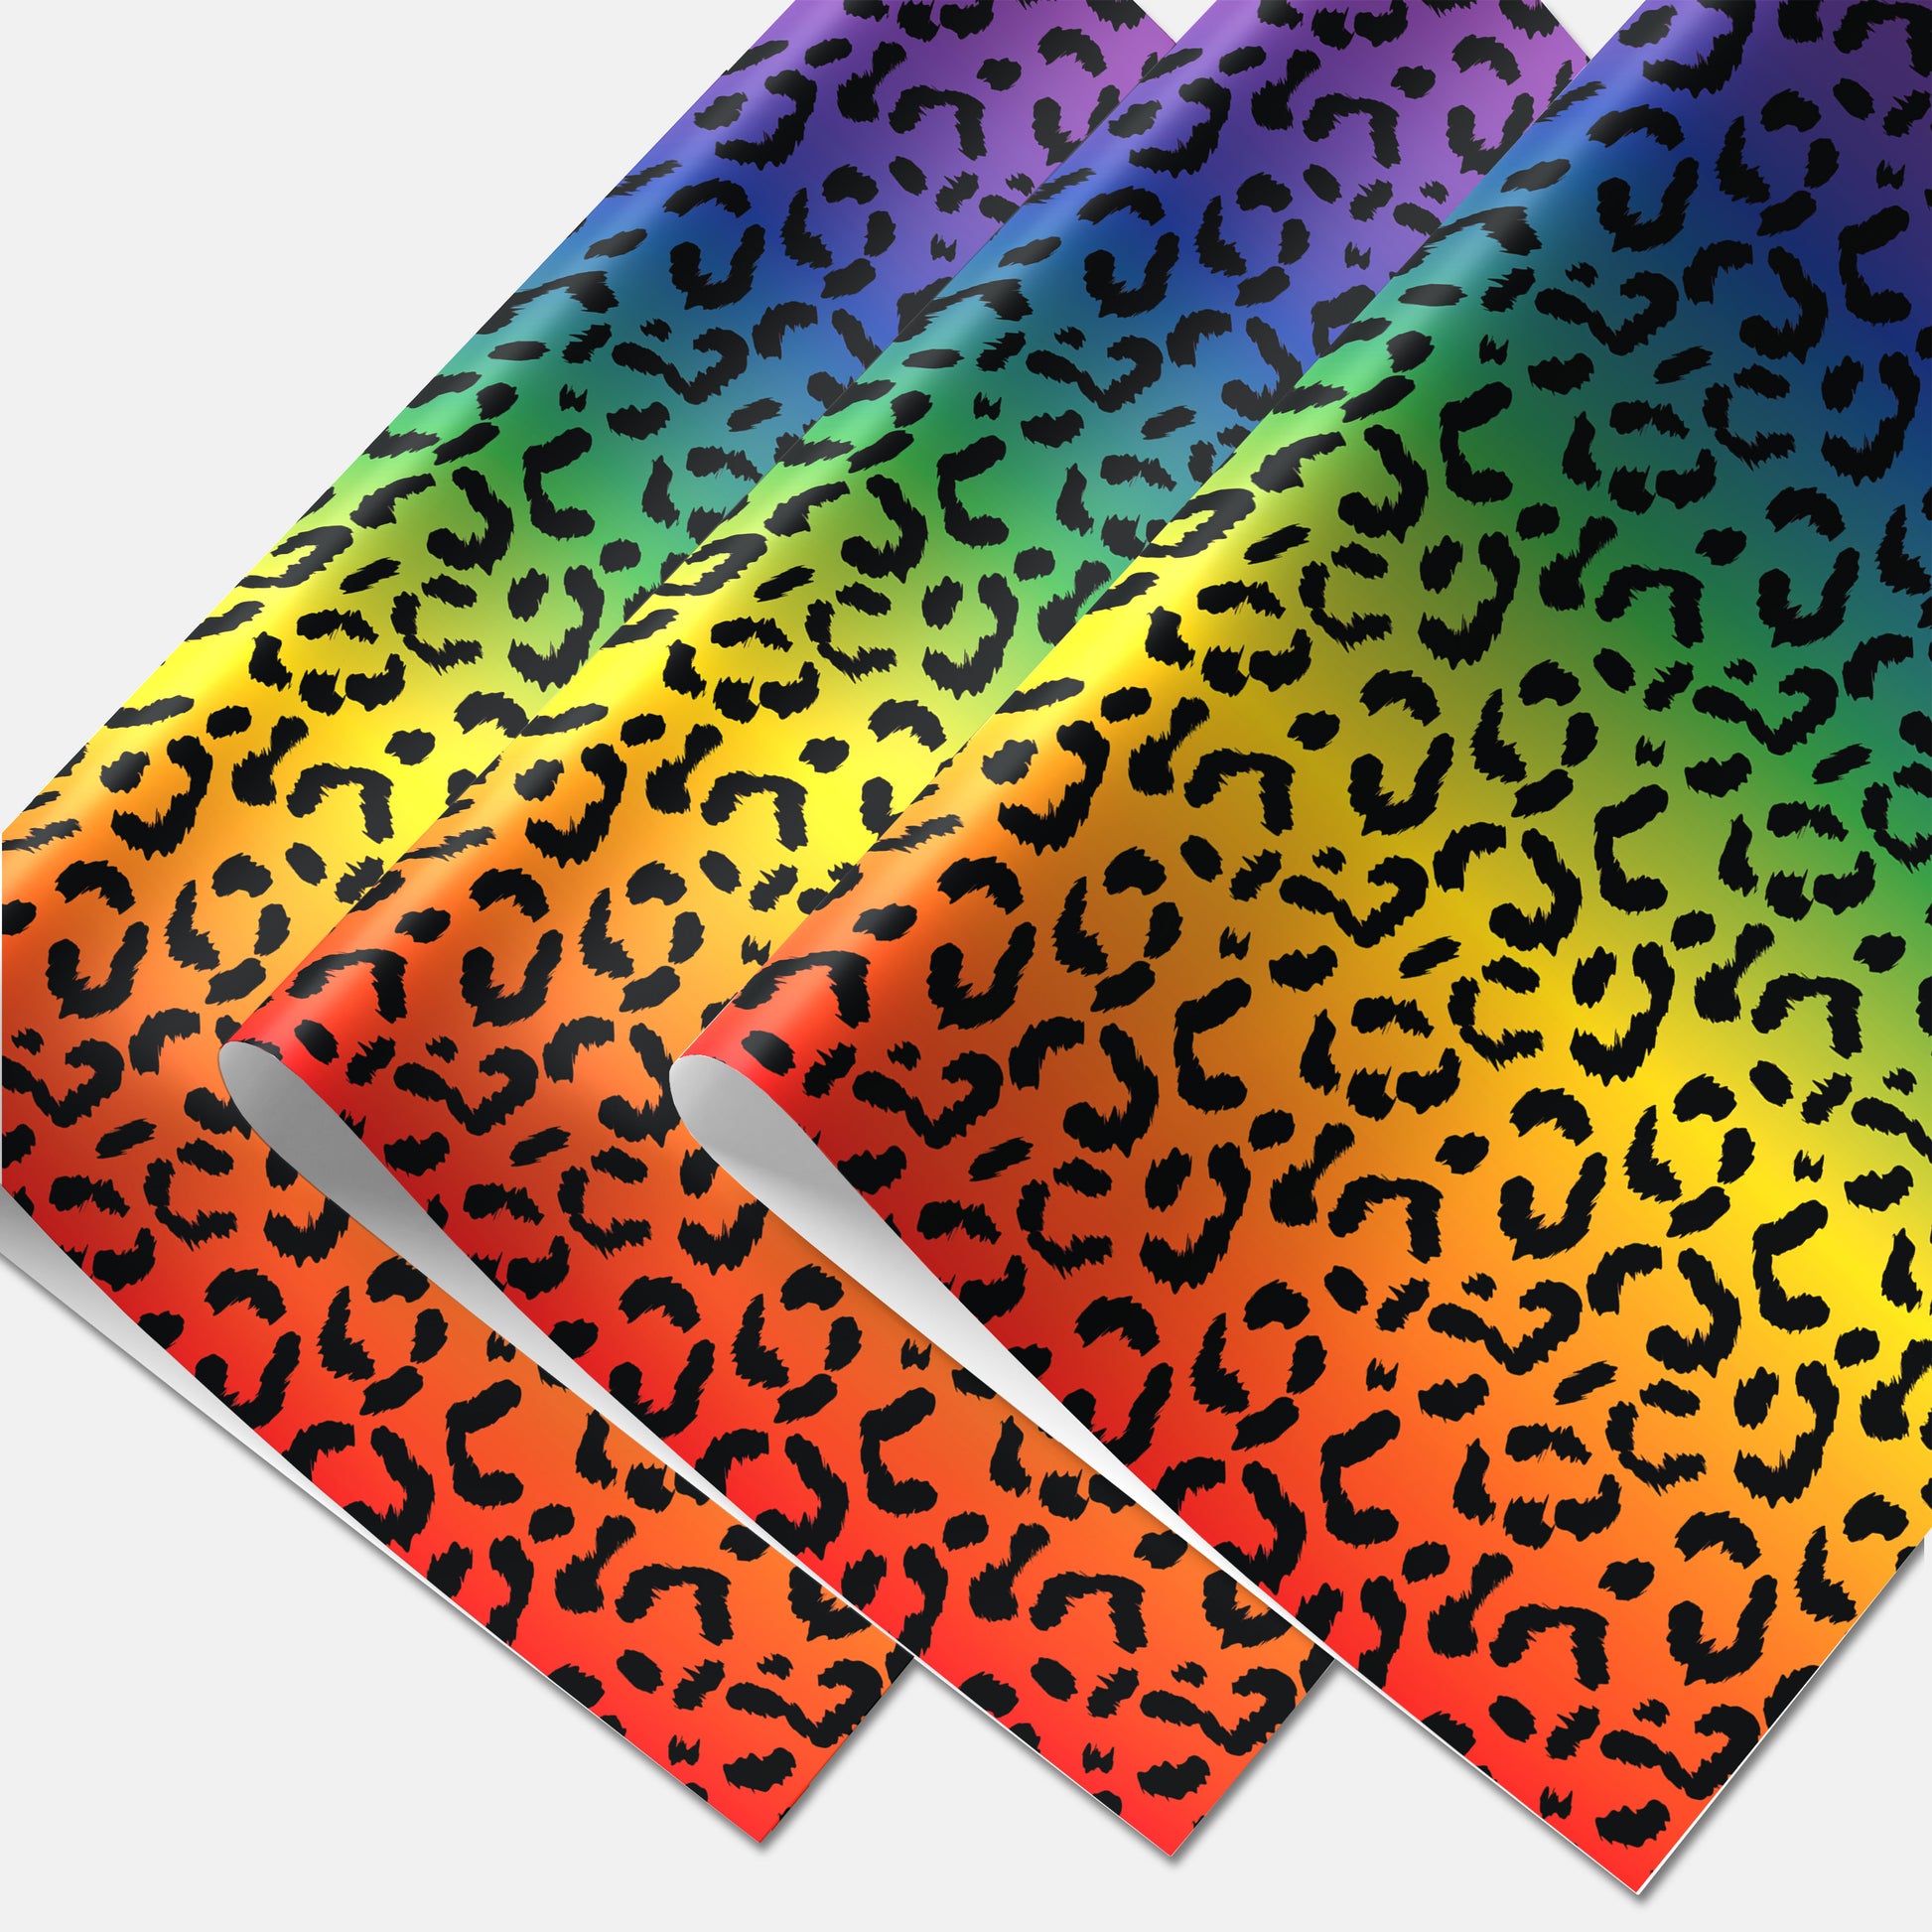 3 sheets of leopard pride gift wrap